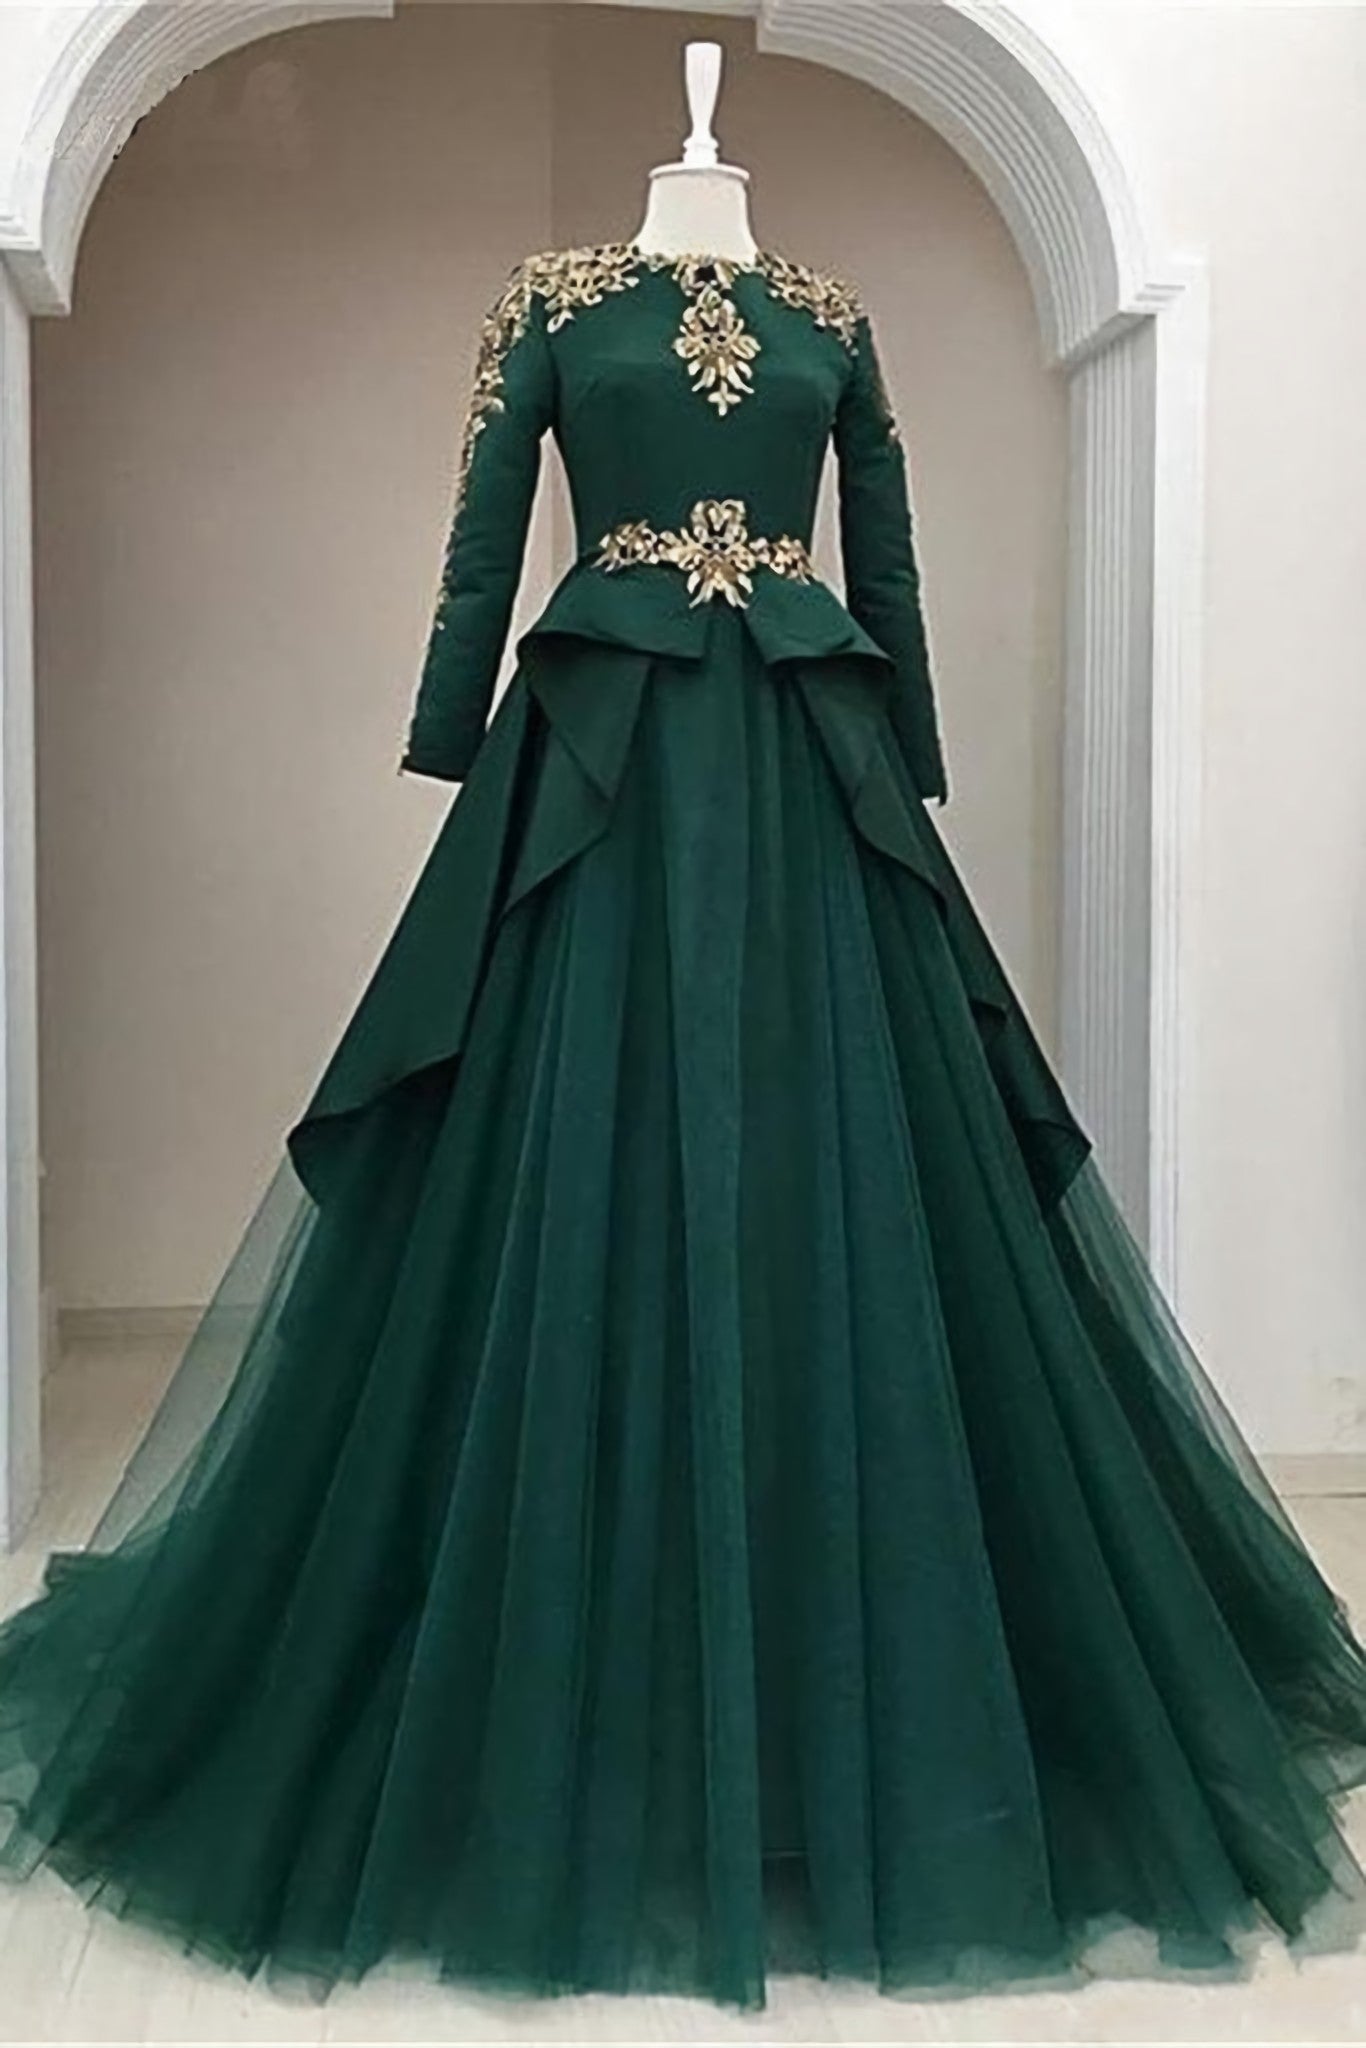 Prom Dresses 2031 Cheap, Dark Green Satin Tulle O Neck Long Sleeve Arabic Formal Prom Dress, With Applique